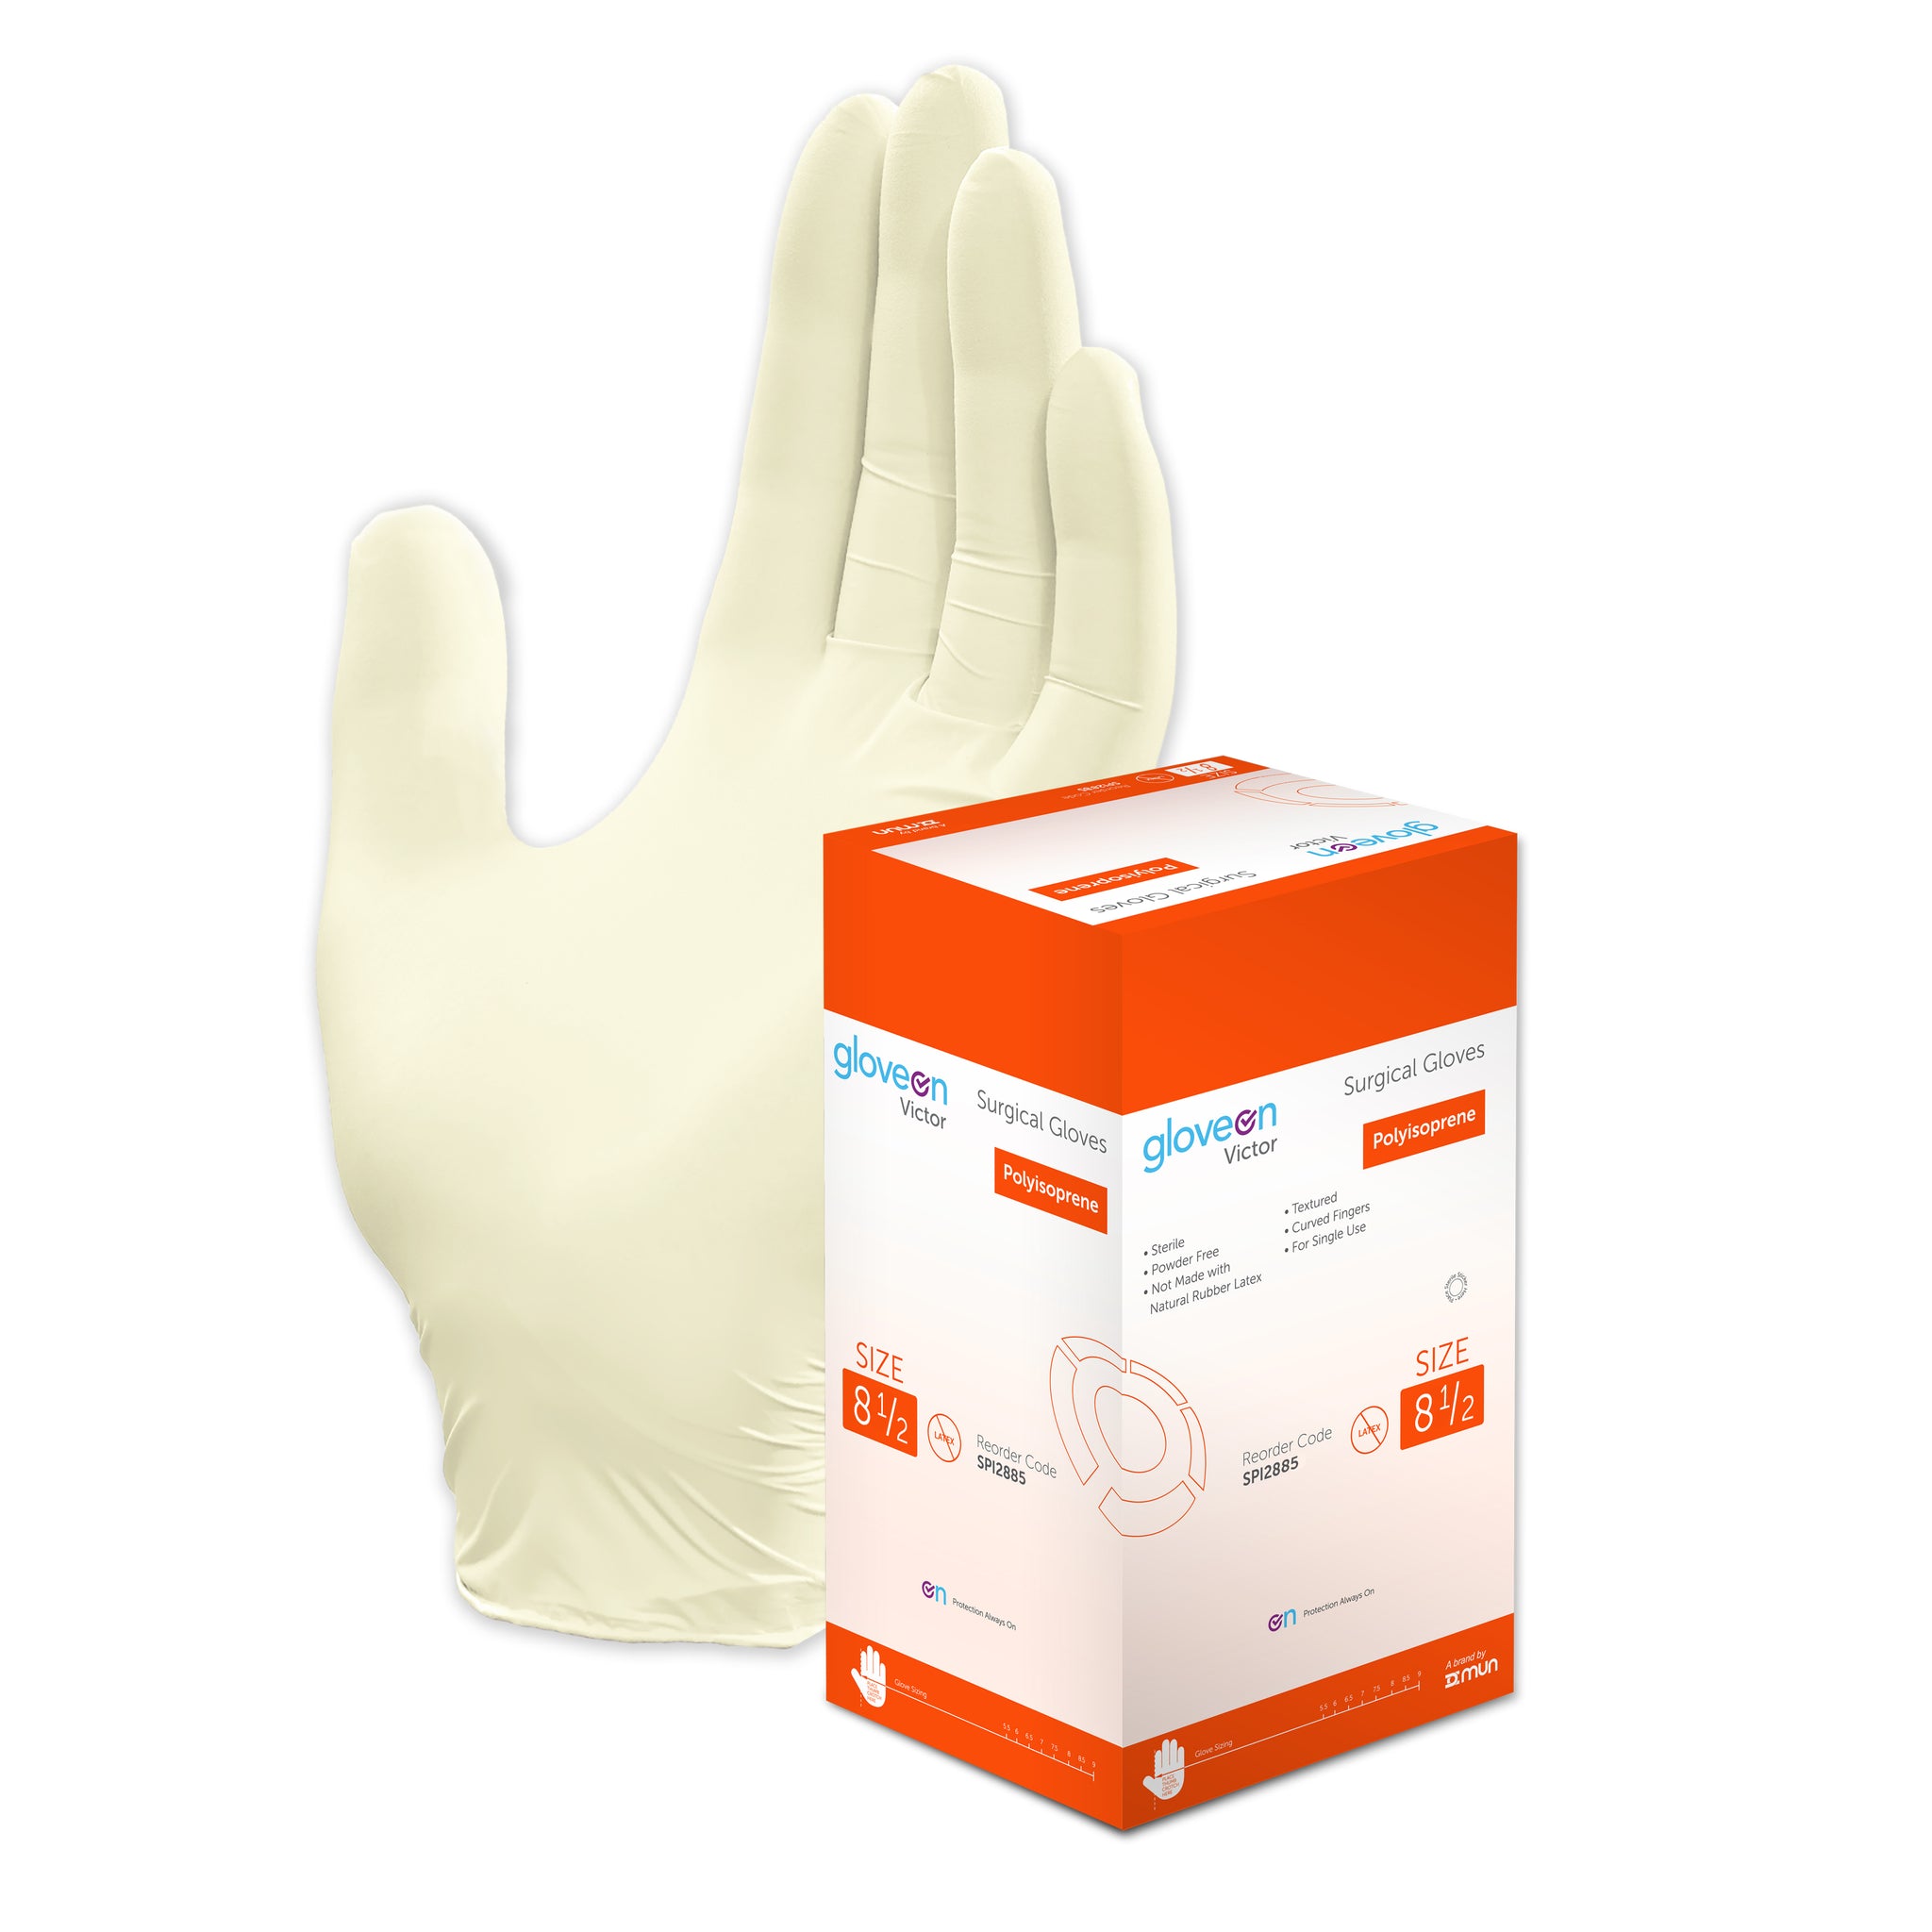 Polyisoprene, Powder Free, Textured, Curved Fingers, Sterile, White - Box of 100, 8.5